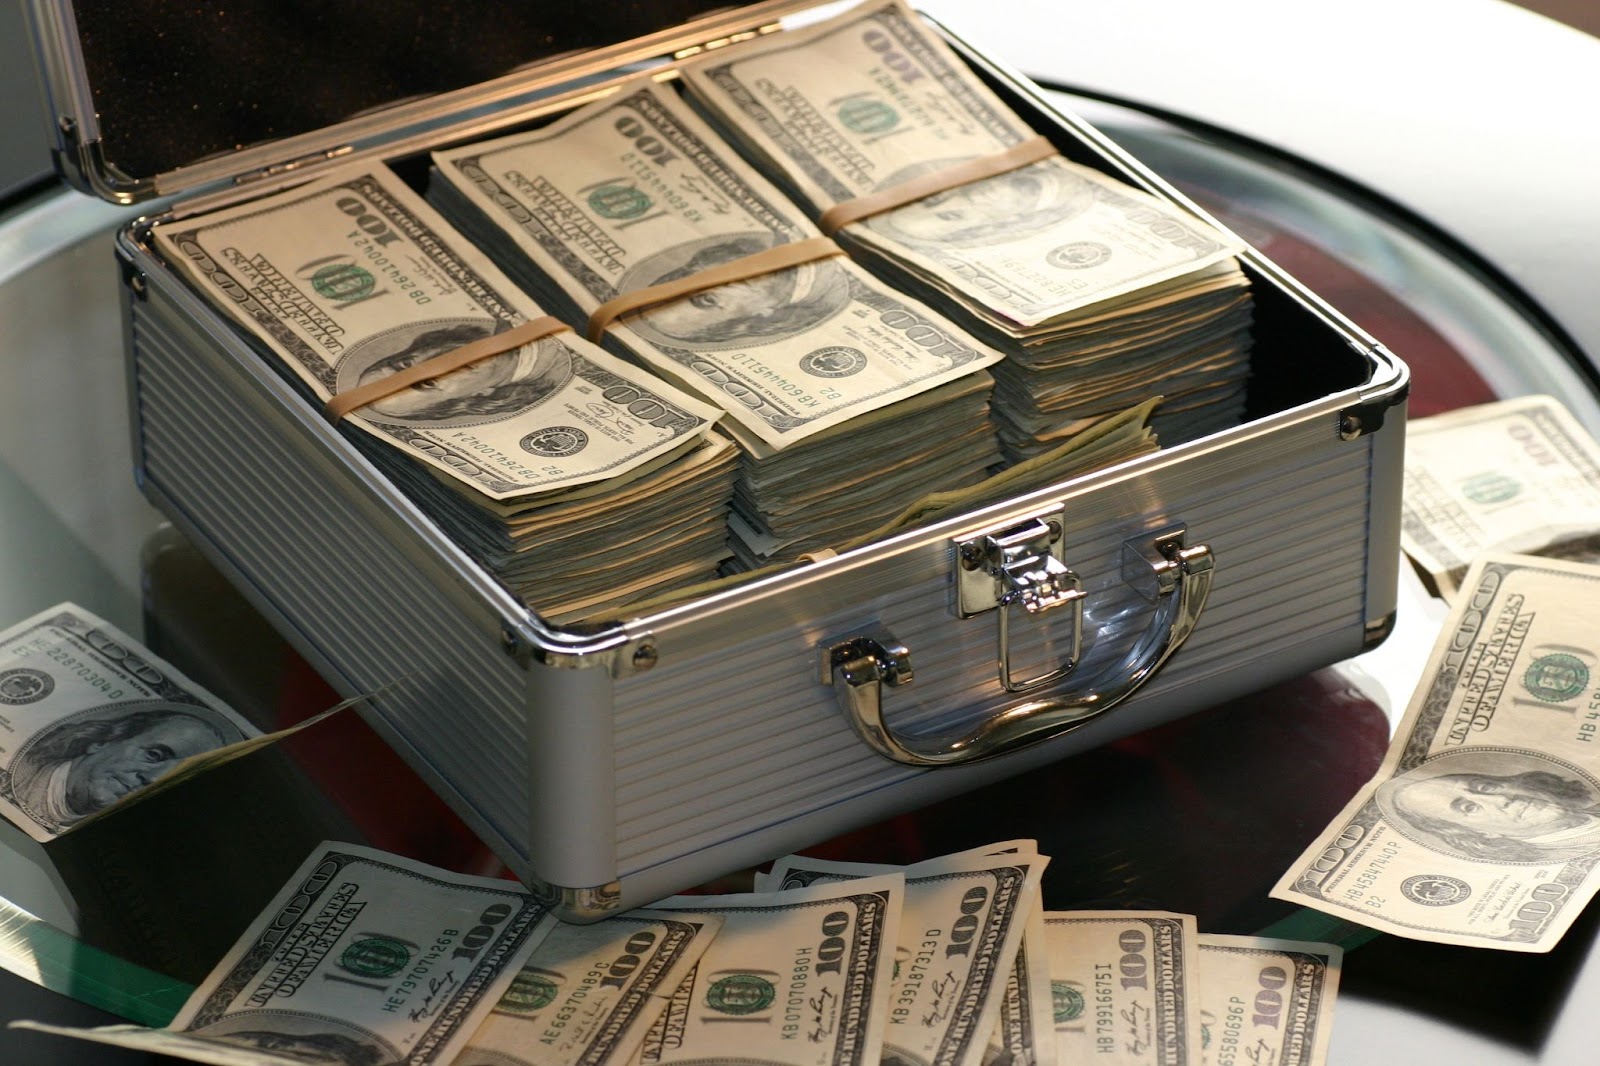 A table with a briefcase of cash offers